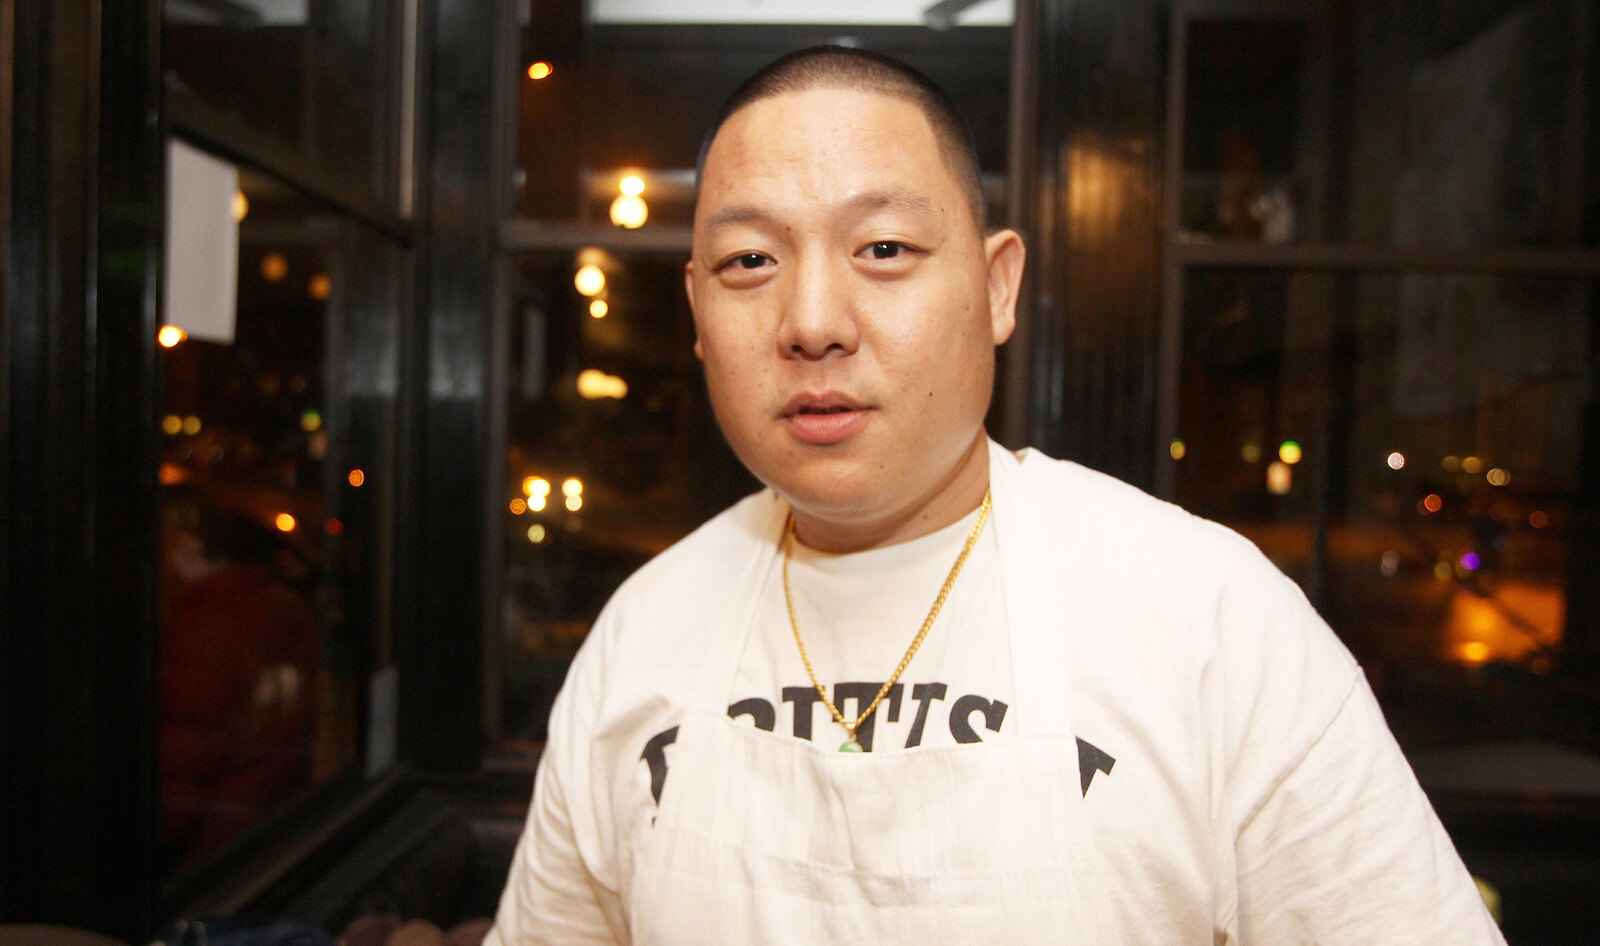 Famed Foodie Eddie Huang Goes Vegan in Response to Amazon Rainforest Fires